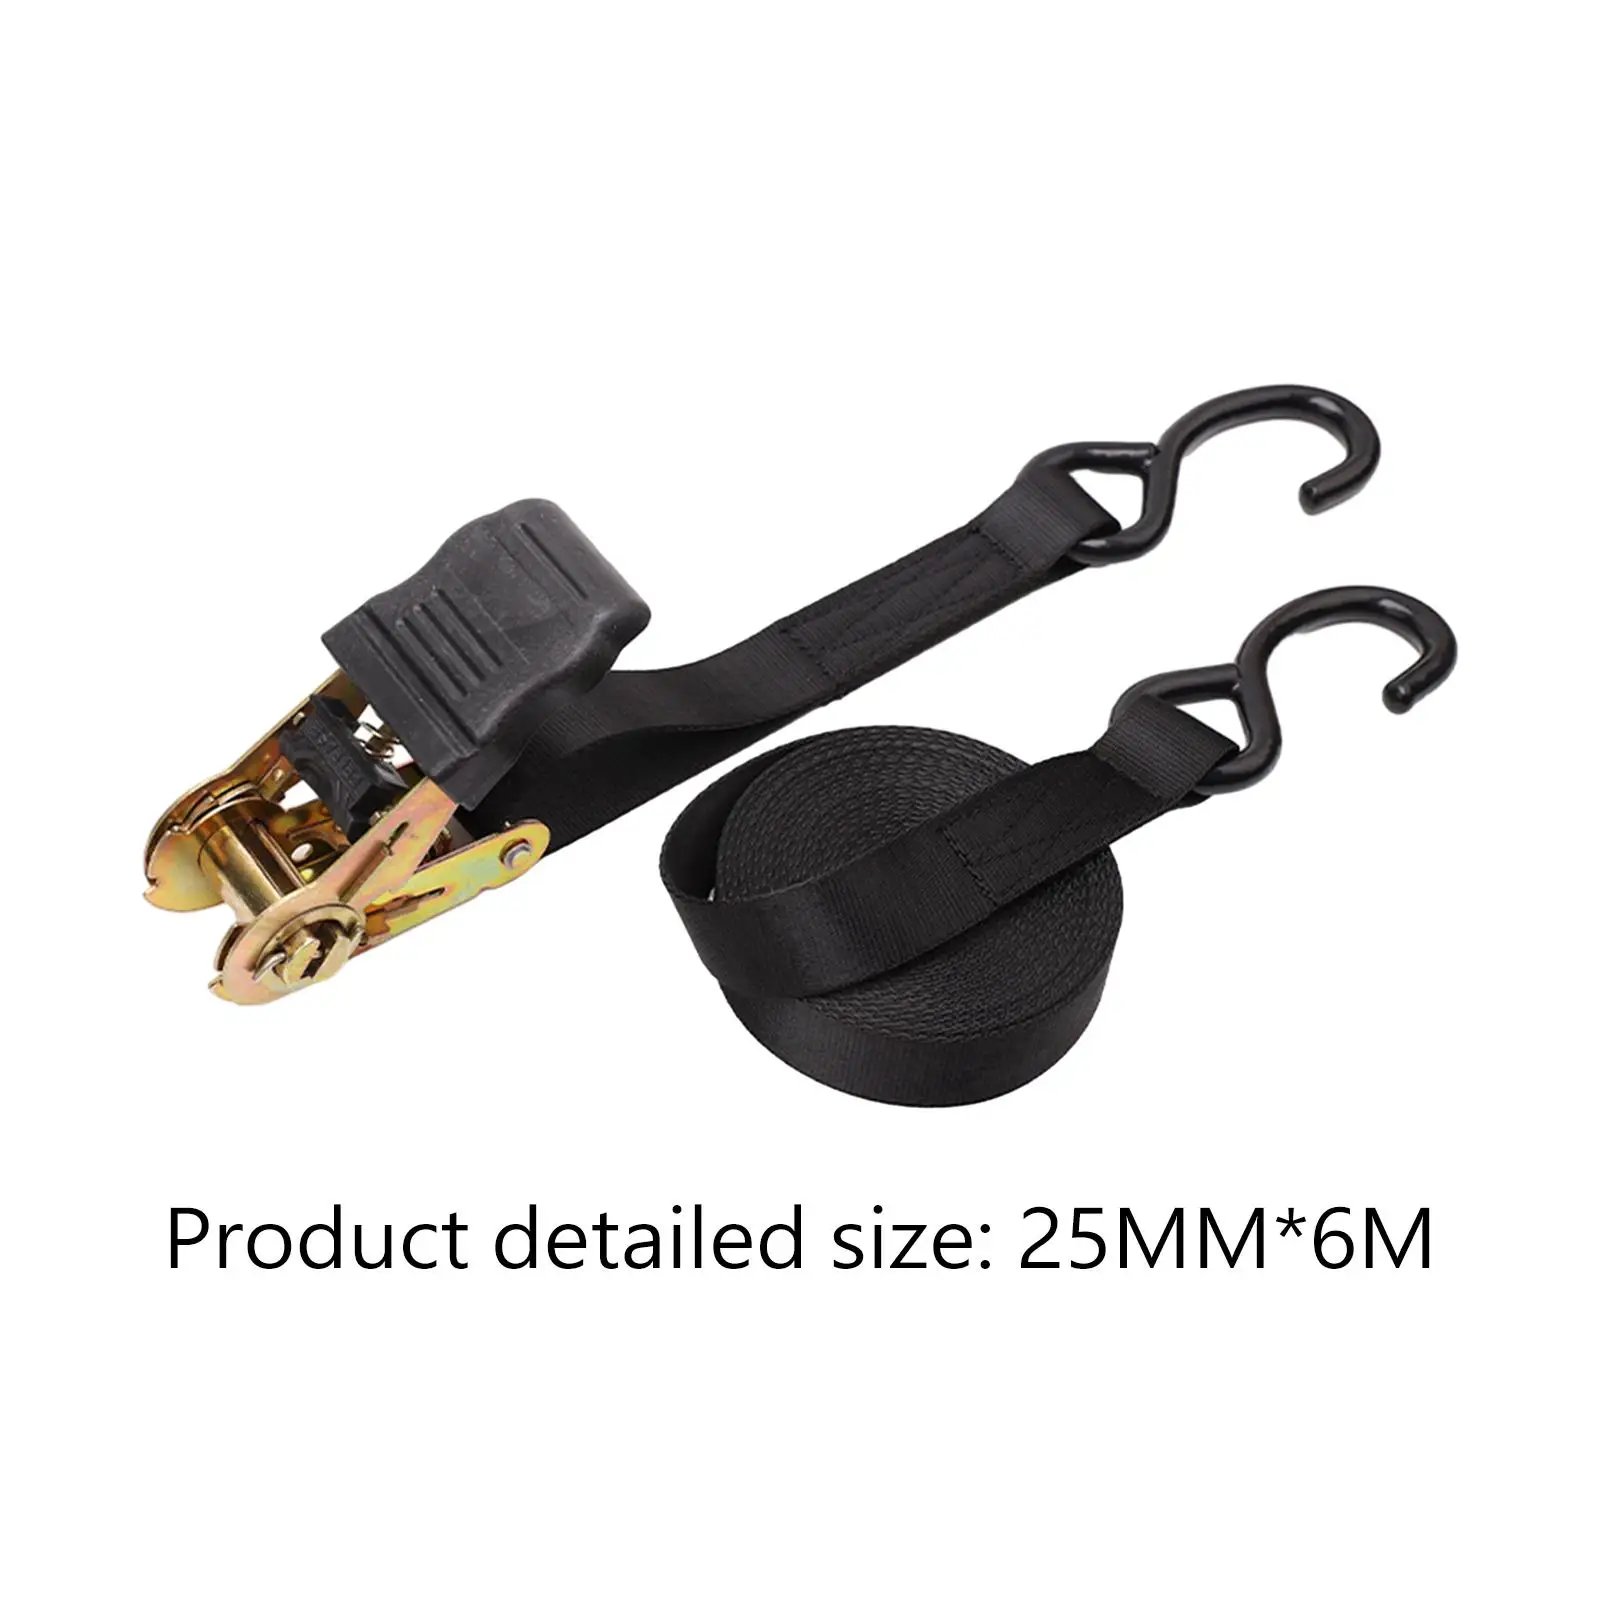 Cargo Ratchet Strap Multifunctional Working Load Capacity Labor Saving Spring Designed Accessories for Automobile Cargo Bundling